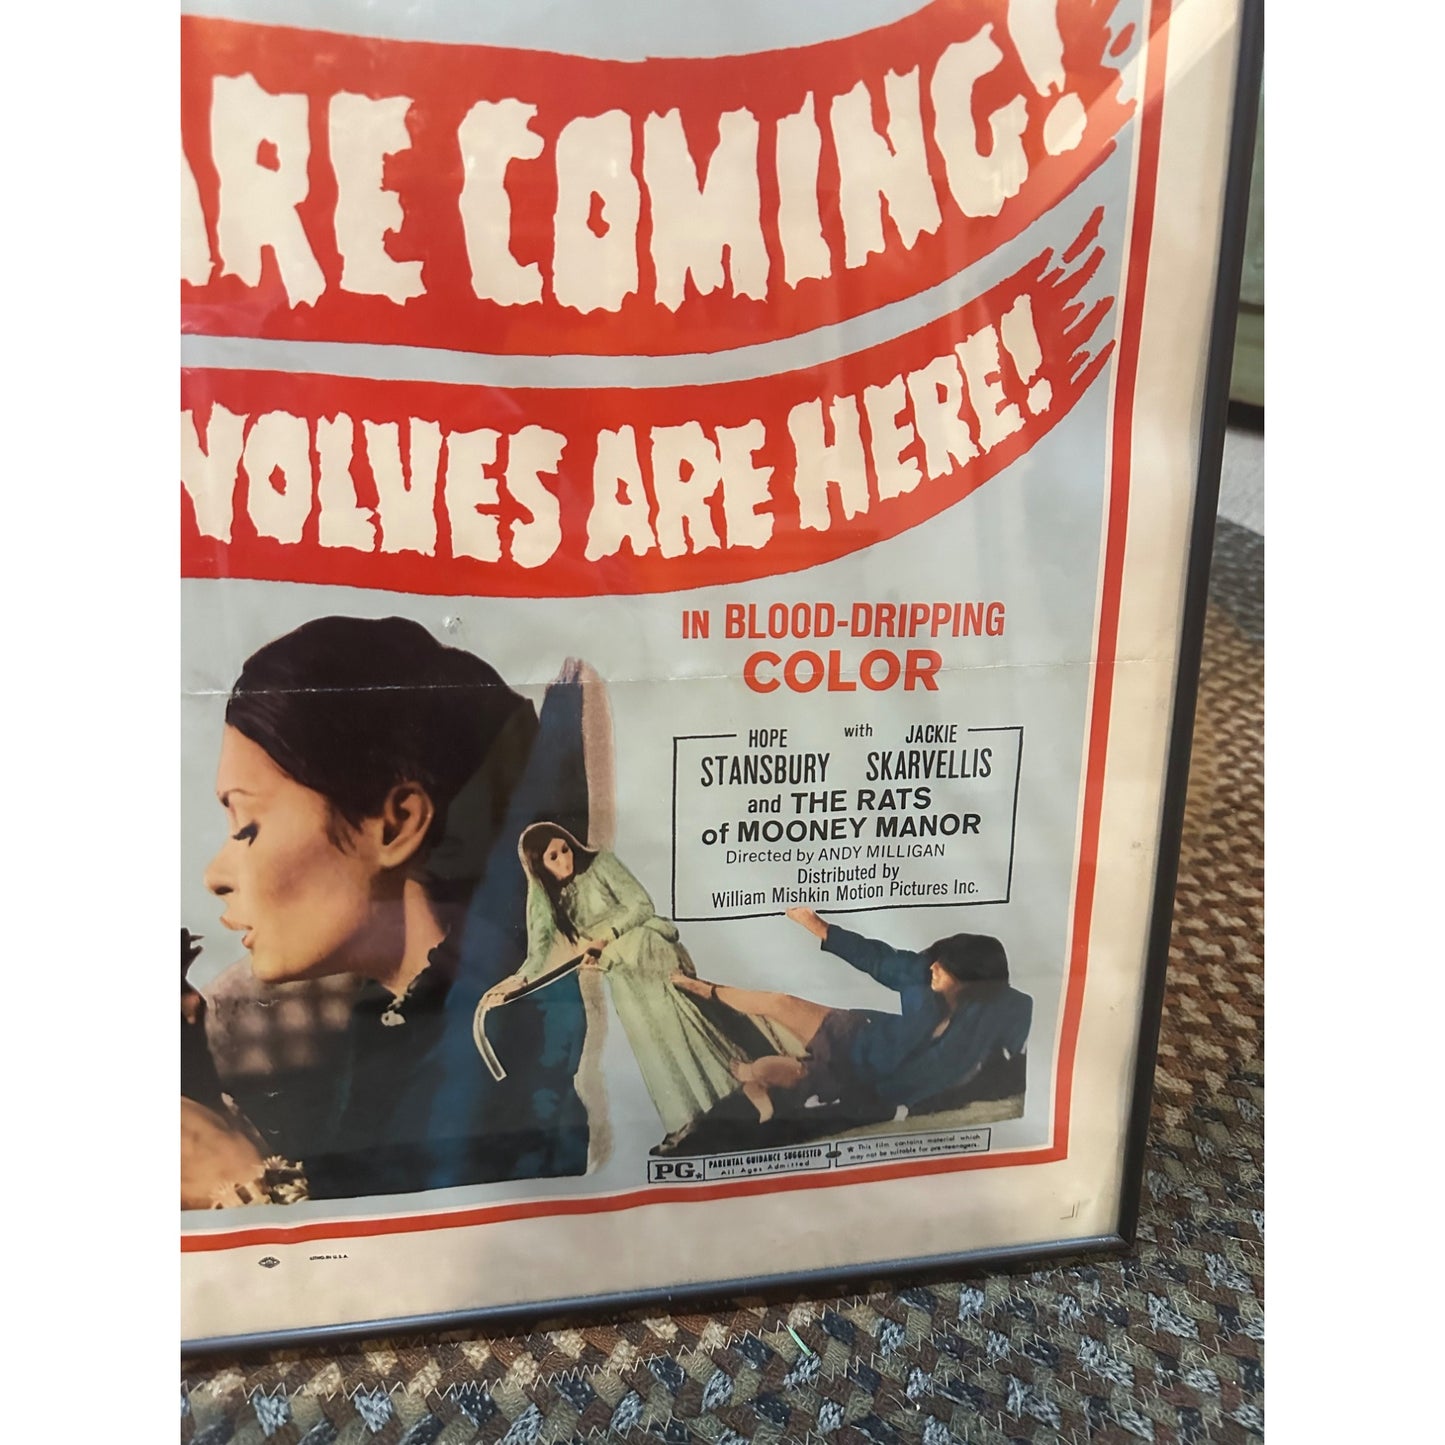 Vintage 1972 "The Rats Are Coming" Werewolves Original 27x41 Movie Poster Horror